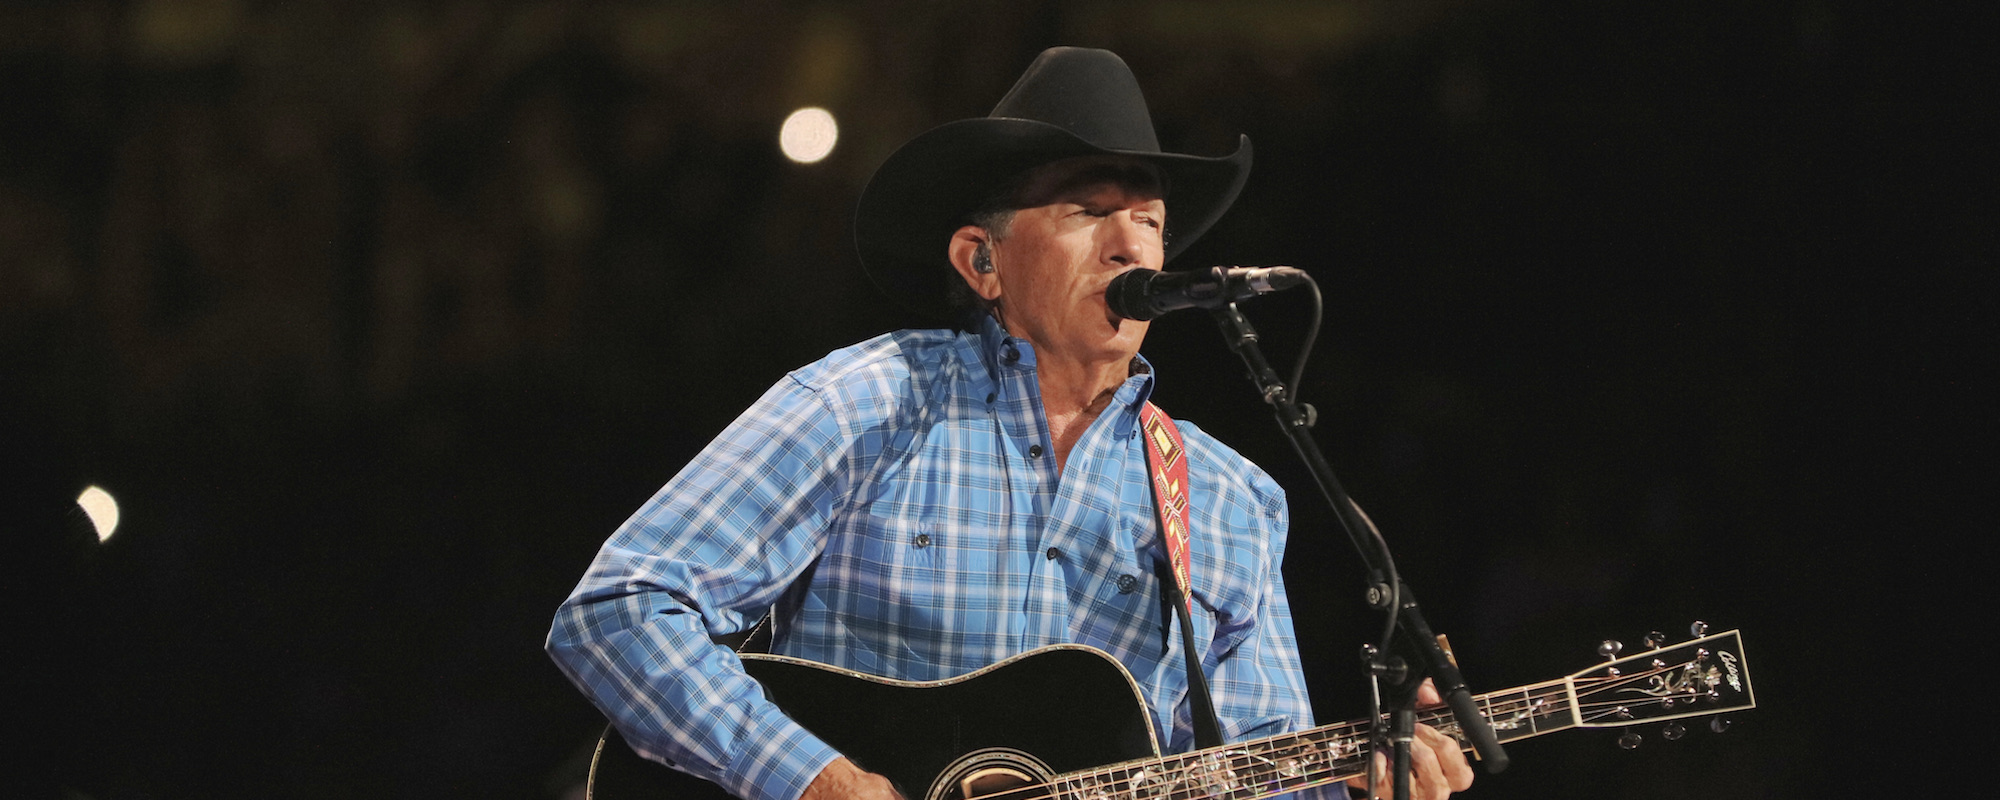 George Strait, J Balvin Booked for 2023 ATLive